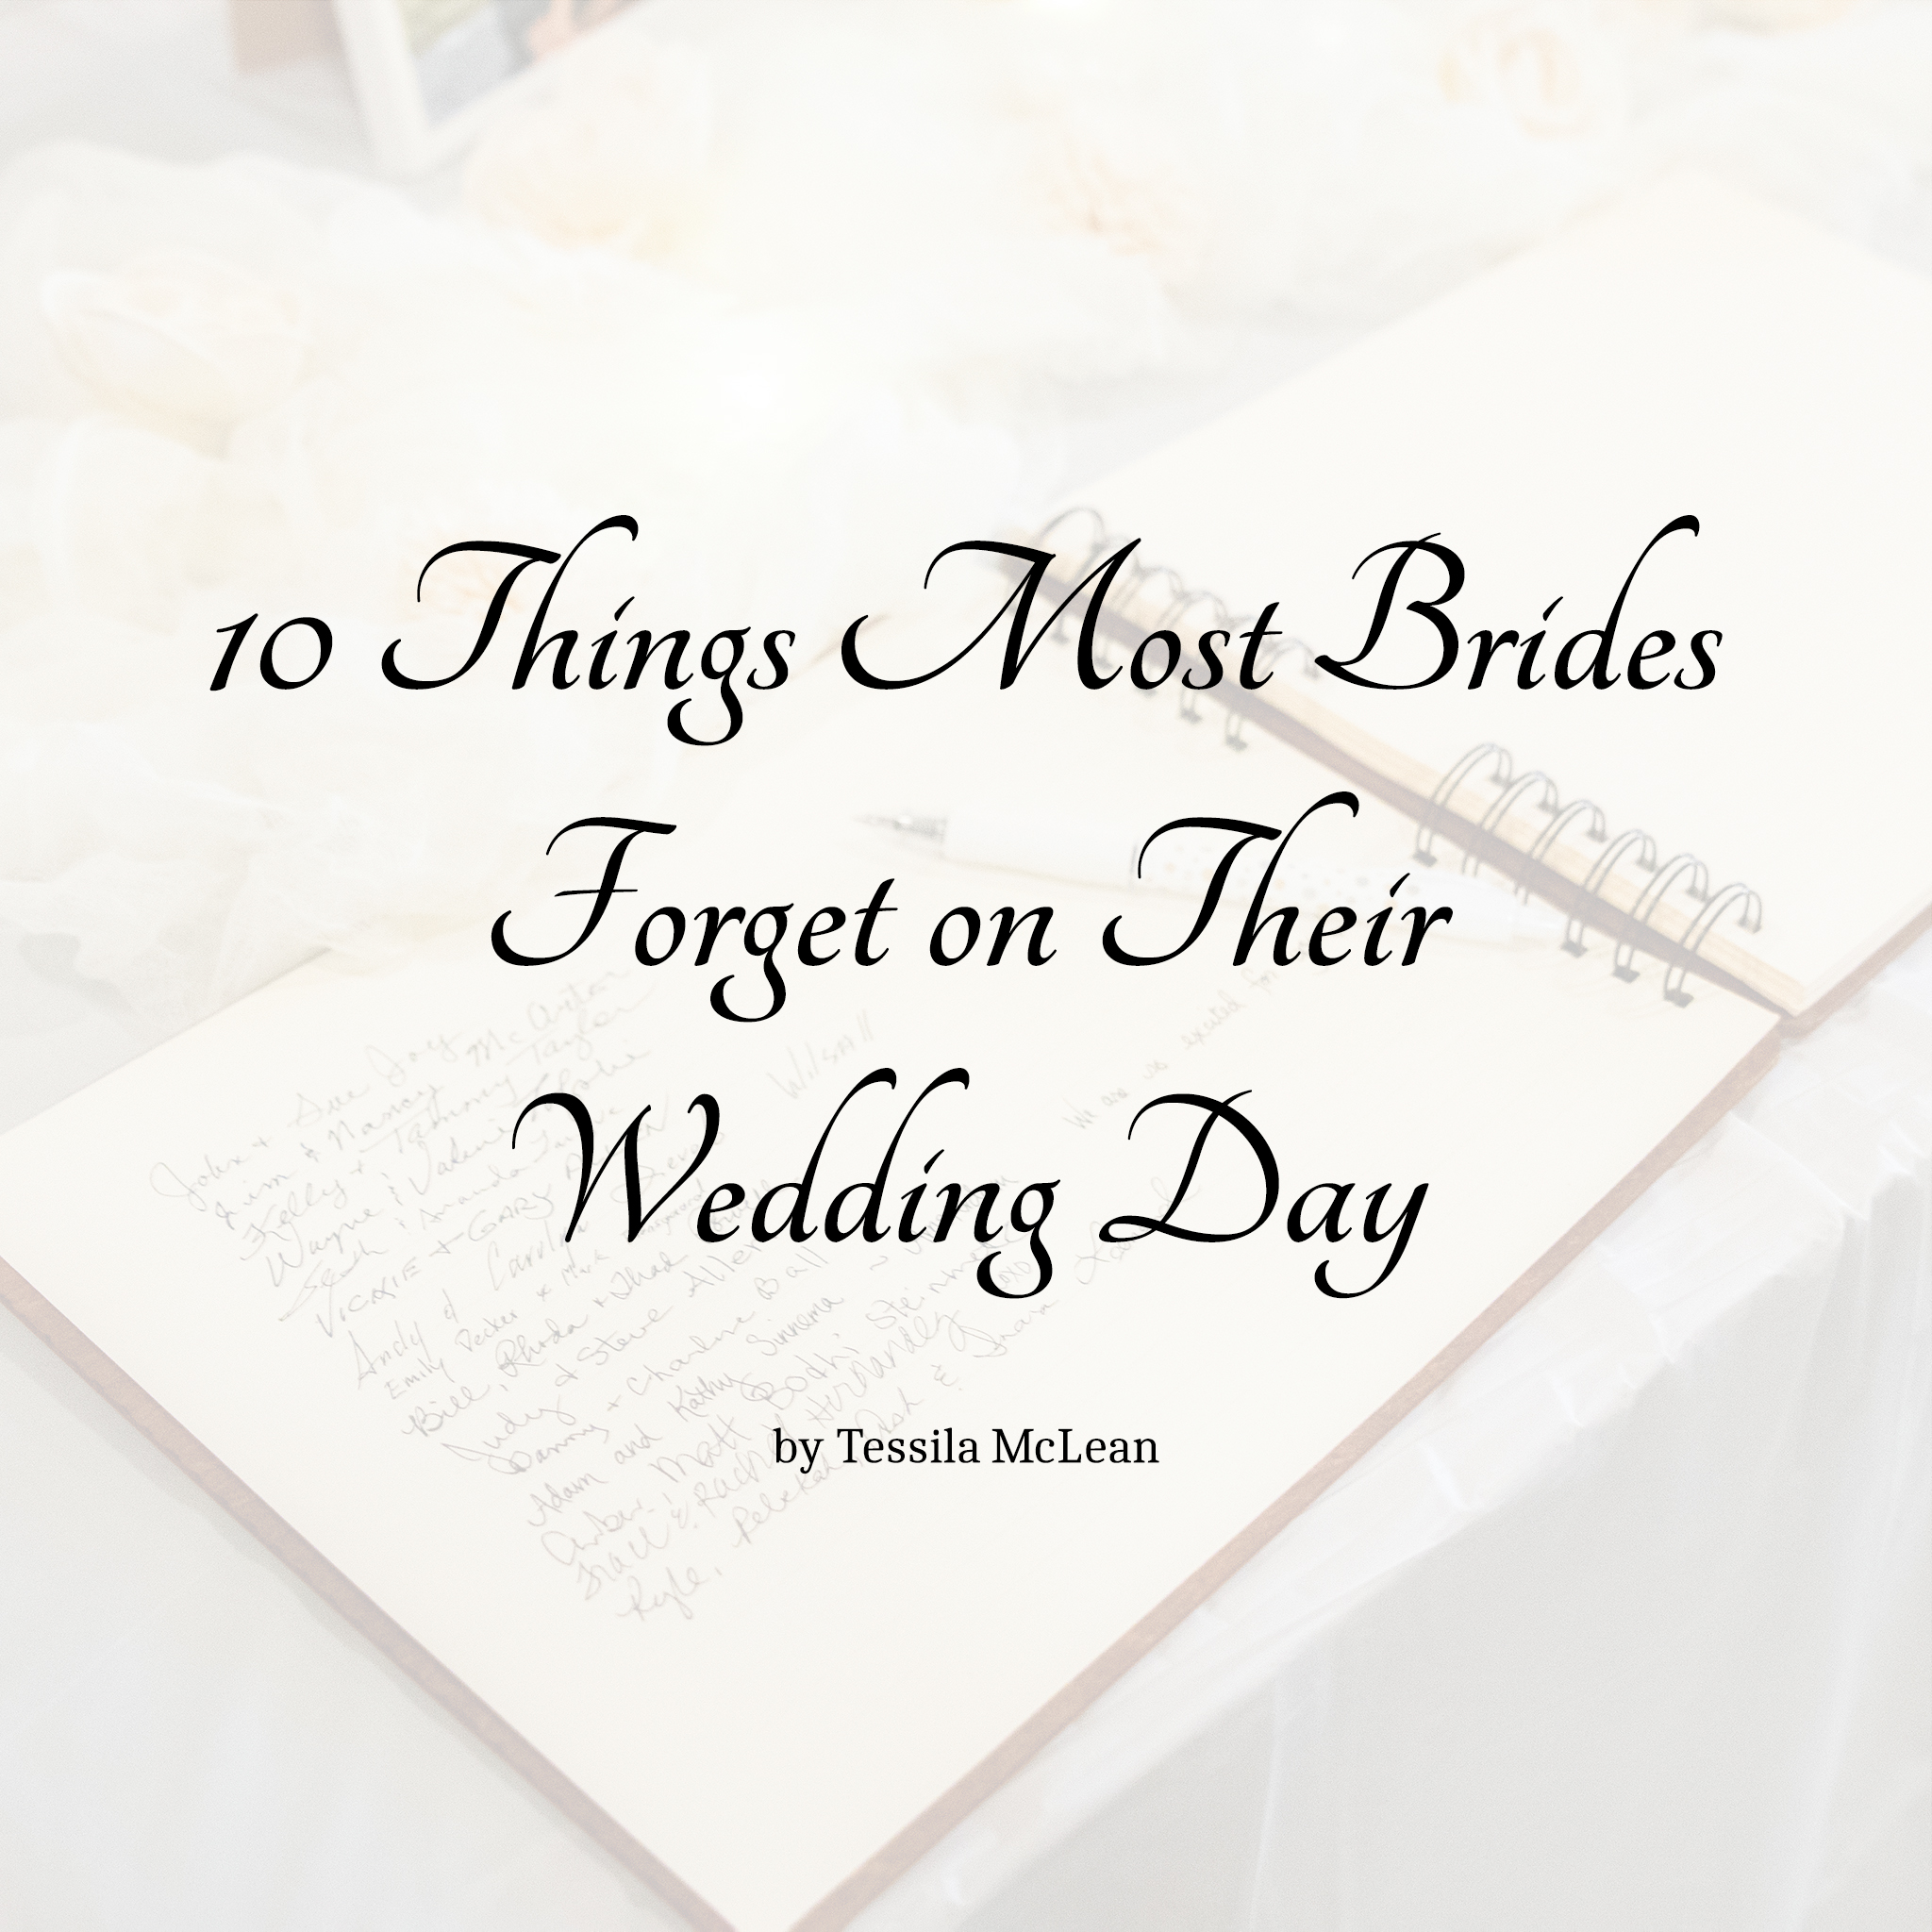 10 Things Most Brides Forget on Their Wedding Day